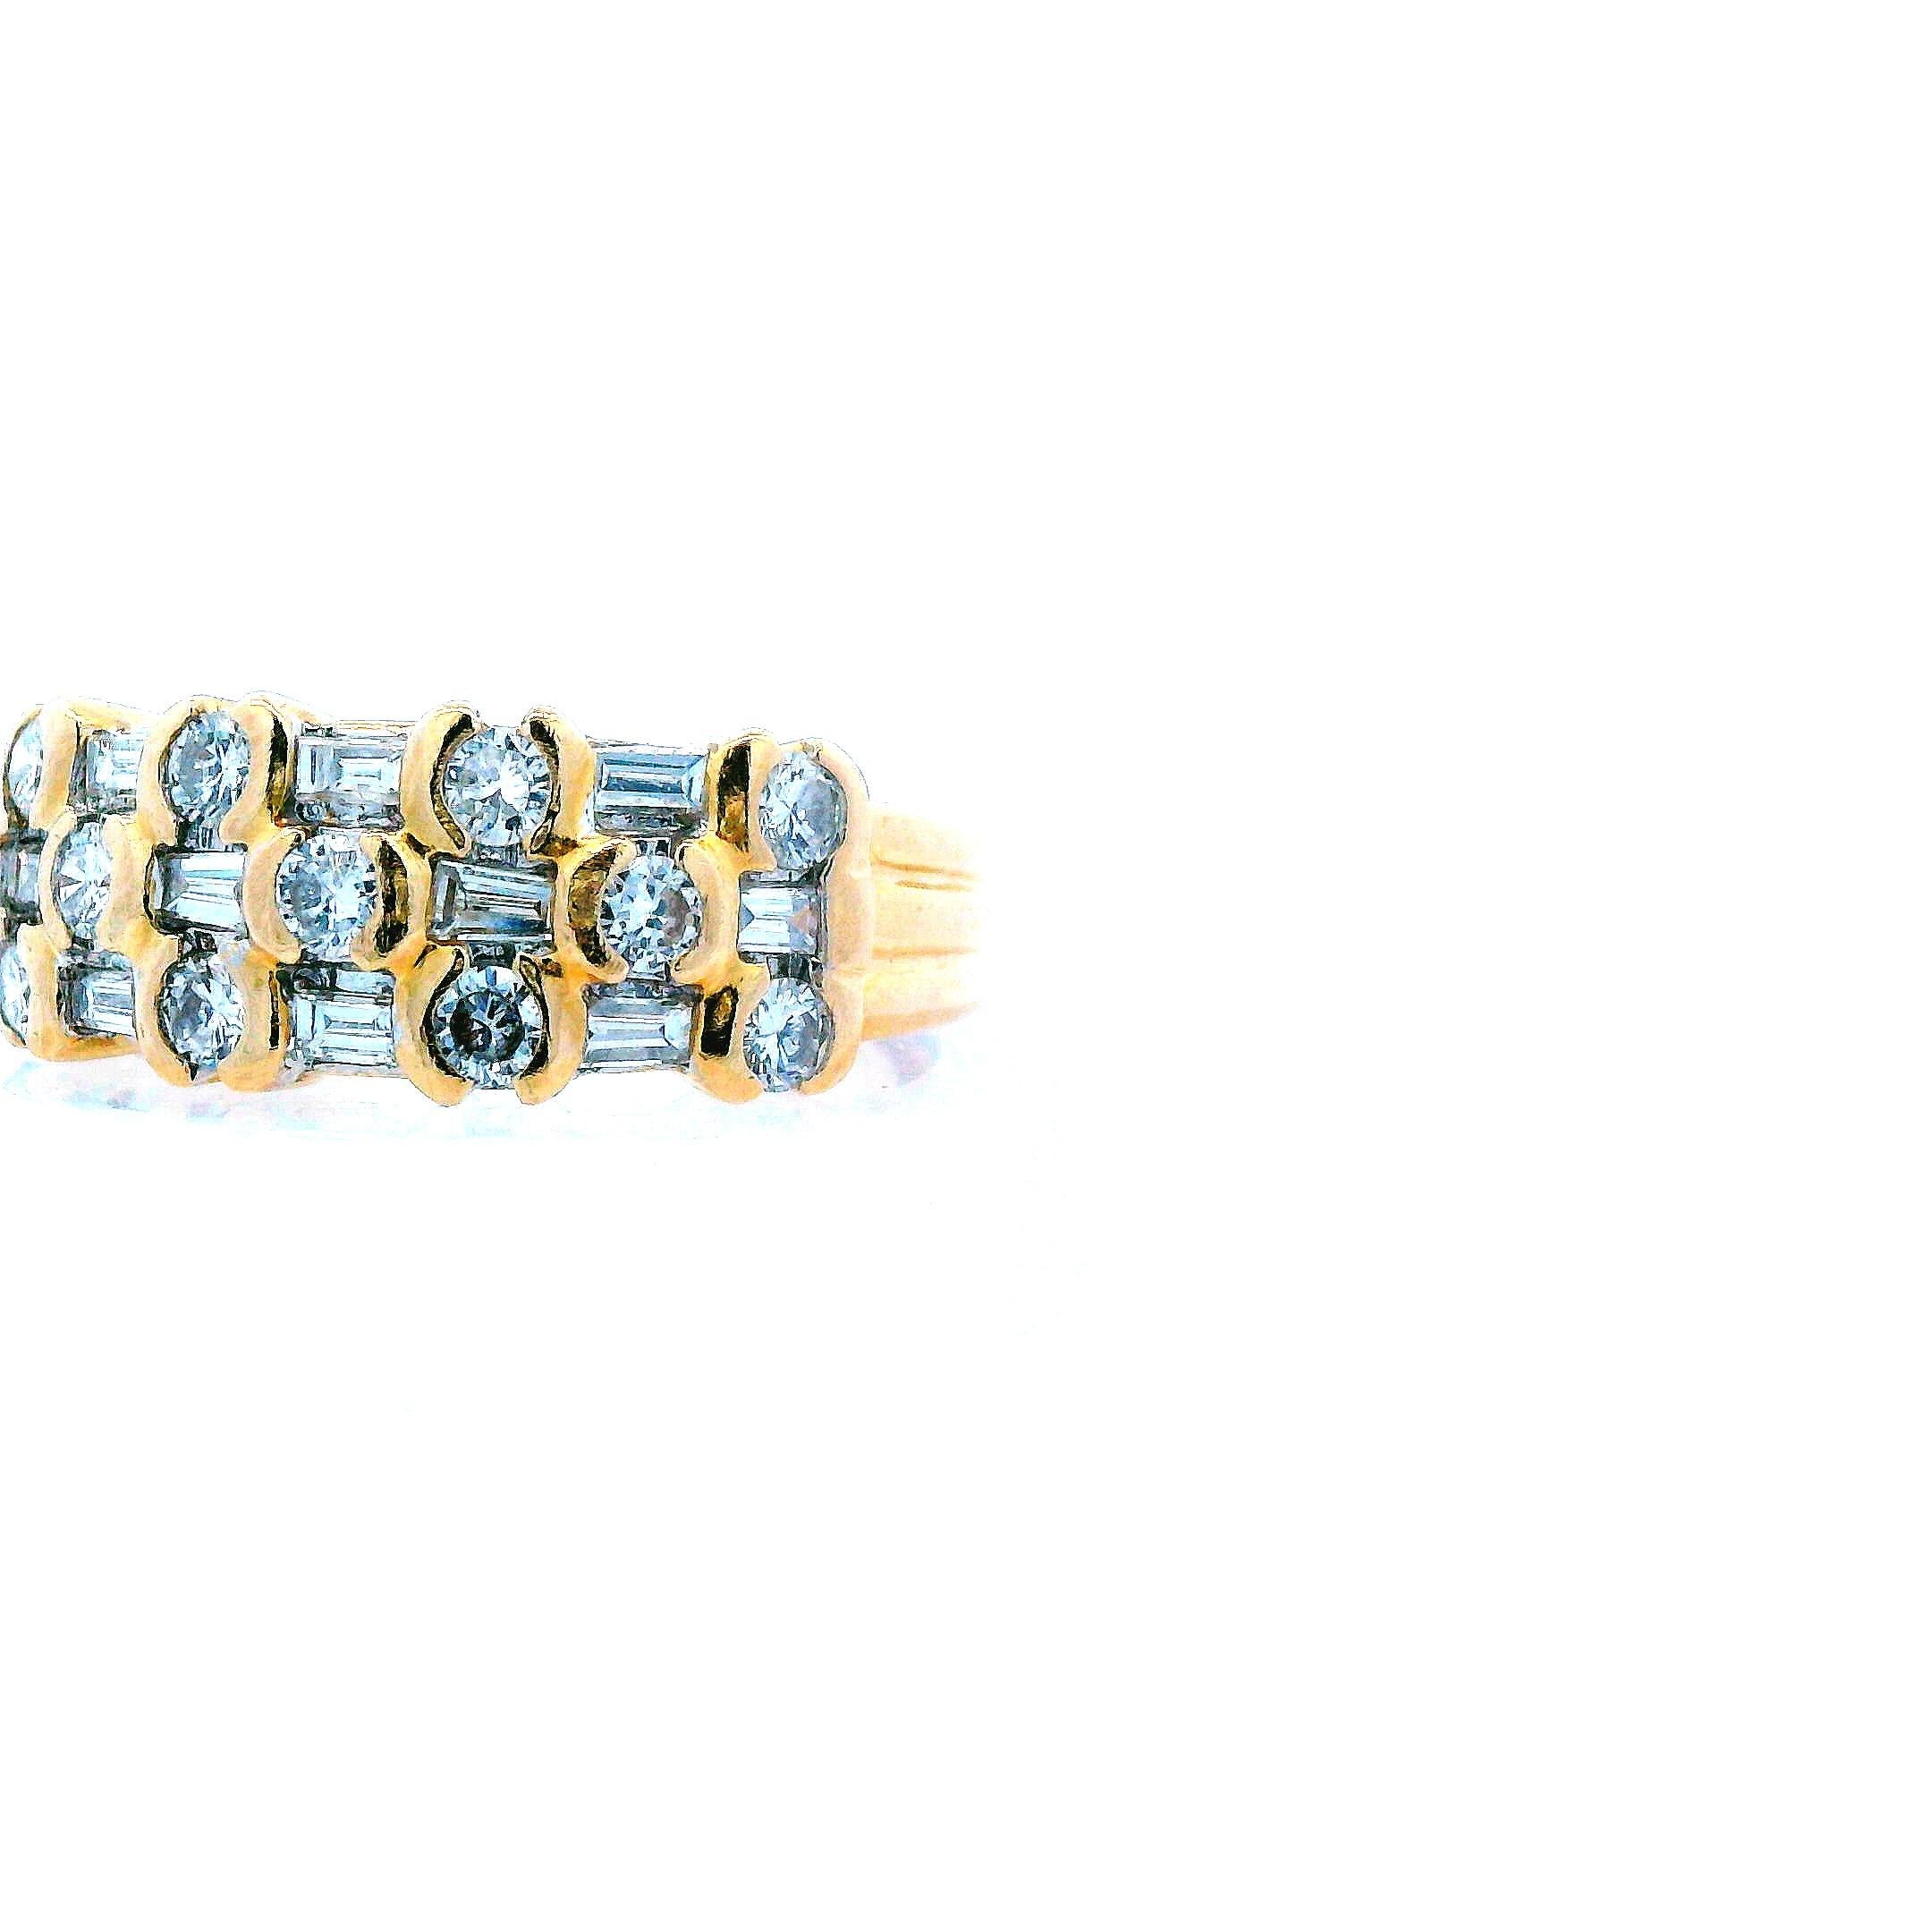 Contemporary 14K Yellow Gold Baguette and Round Diamond Ring  In Excellent Condition For Sale In Lexington, KY